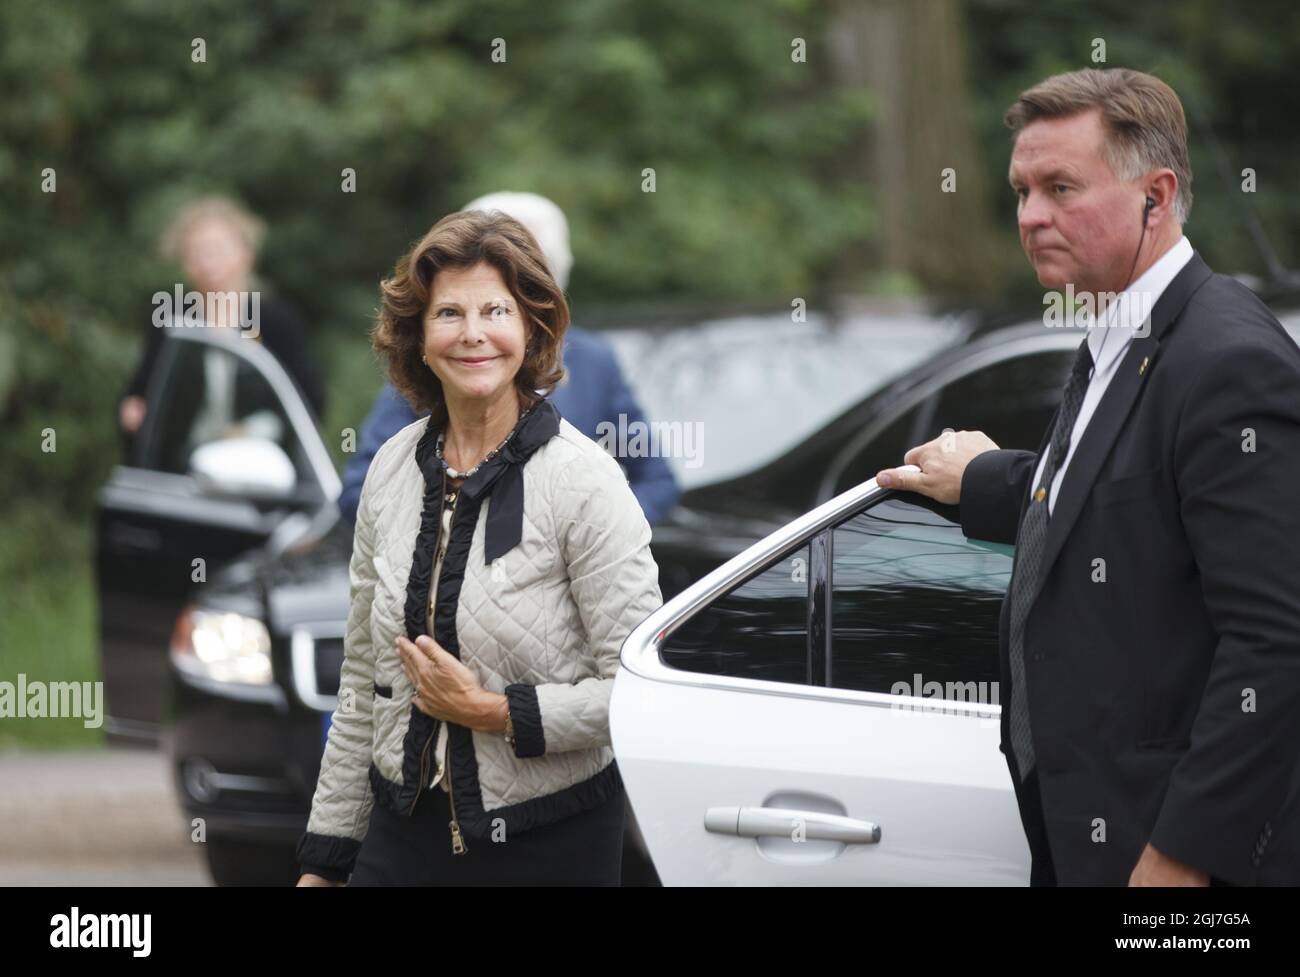 HALMSTAD 20120904 King Carl Gustaf and Queen Silvia are seen upon the arrival to Halmstad, Sweden, September 4, 2012. The Royals are on a one day visit to the county of Halland.  Foto: Anders Andersson/SCANPIX Kod 11091 Stock Photo